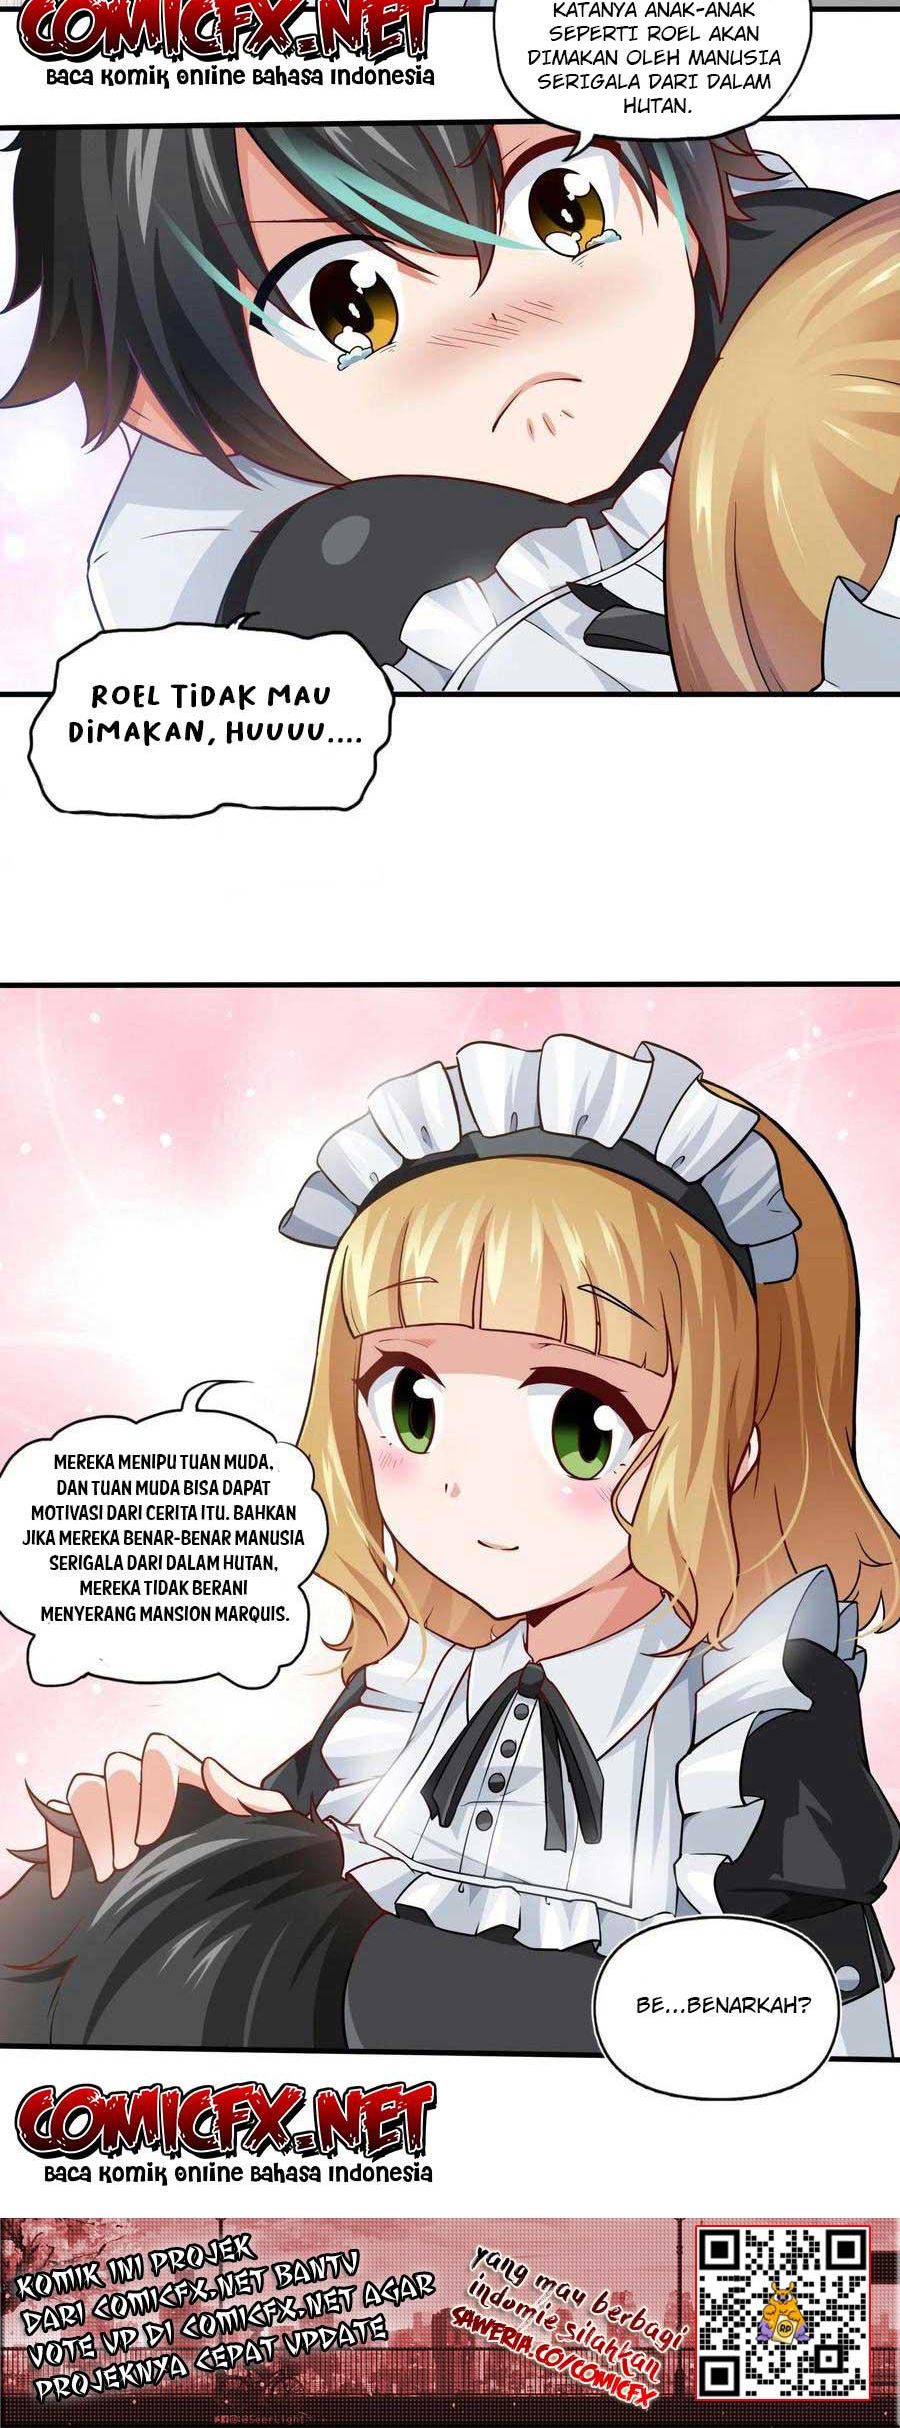 Dilarang COPAS - situs resmi www.mangacanblog.com - Komik little tyrant doesnt want to meet with a bad end 001 - chapter 1 2 Indonesia little tyrant doesnt want to meet with a bad end 001 - chapter 1 Terbaru 18|Baca Manga Komik Indonesia|Mangacan